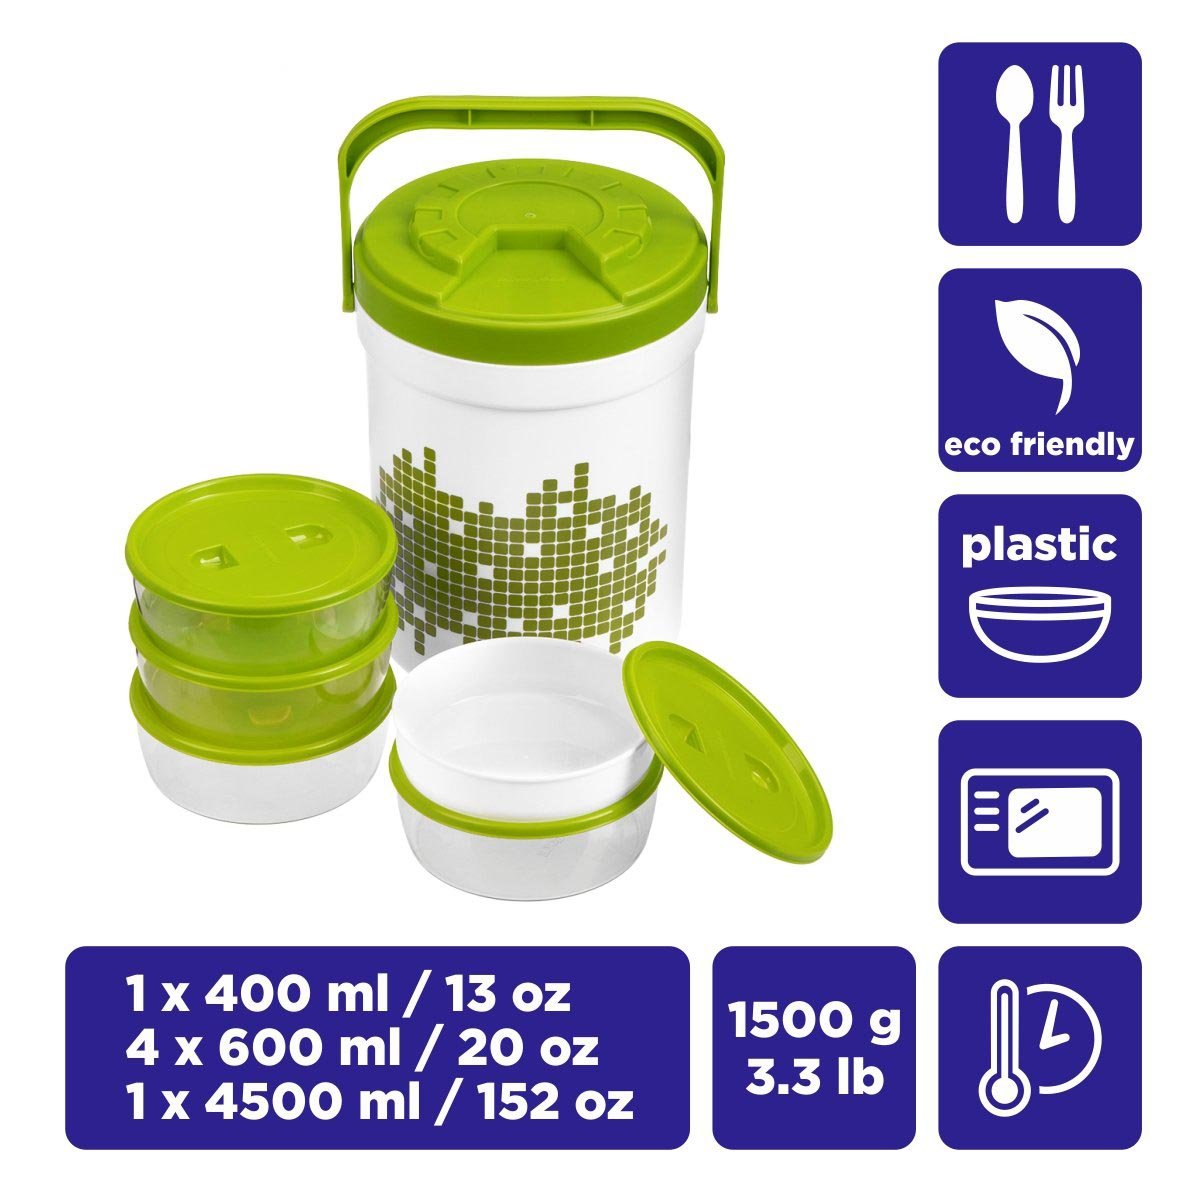 Picnic Treat Set of 6 Plastic Lunch Containers | Microwave Safe | Food Storage Boxes